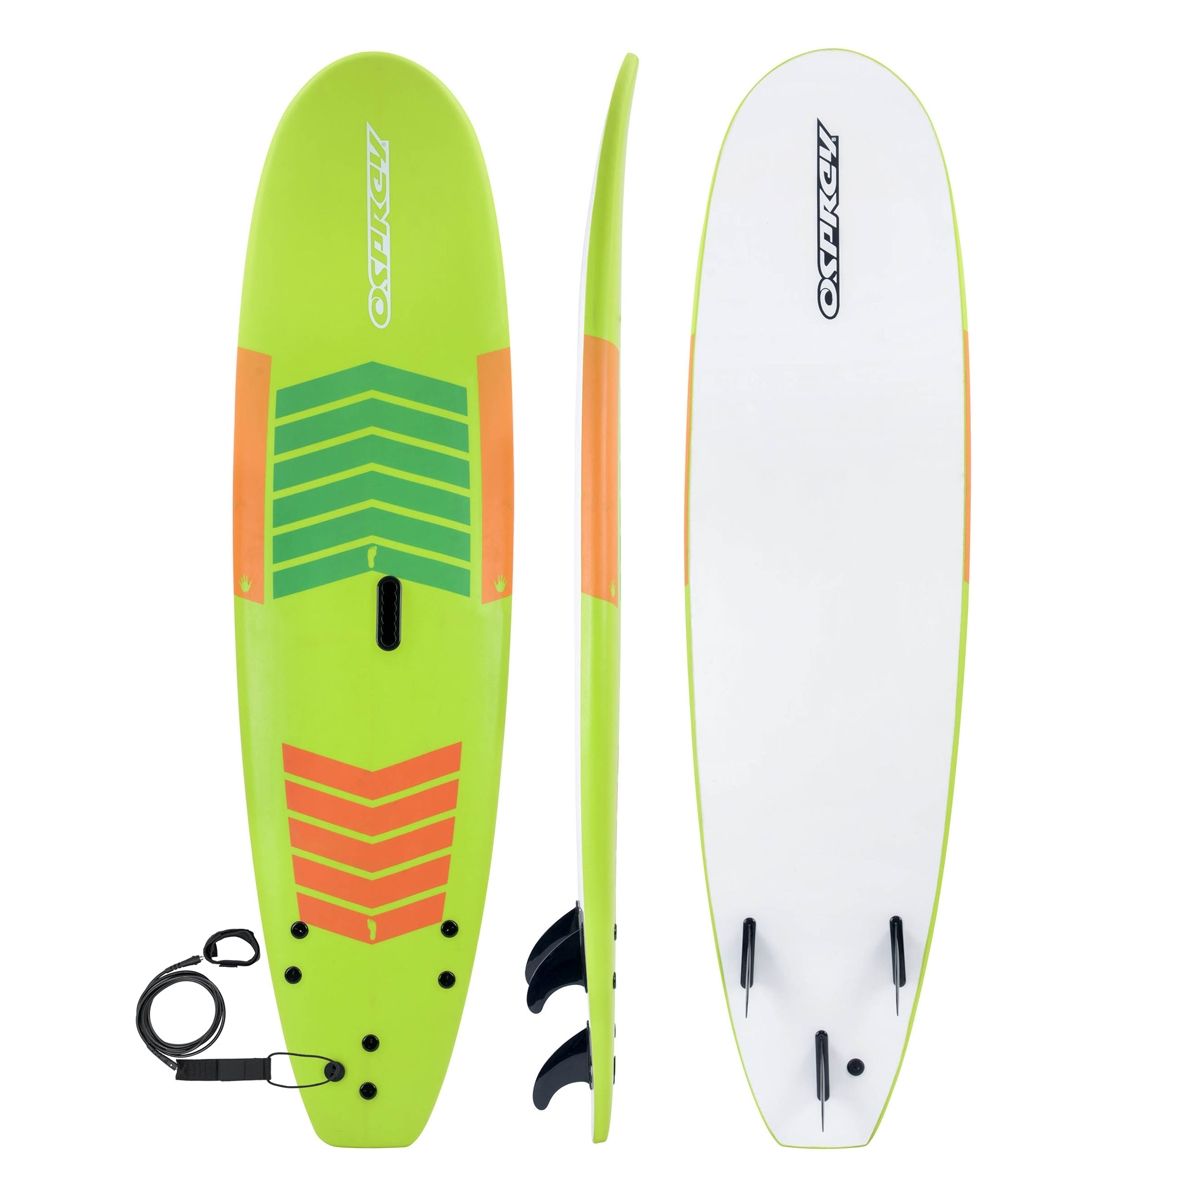 Osprey Pinstripe Foam Surfboard Soft Foamie Complete with Leash and Fins High Spec Vacuum Sealed 7.2 ft Wood Effect 